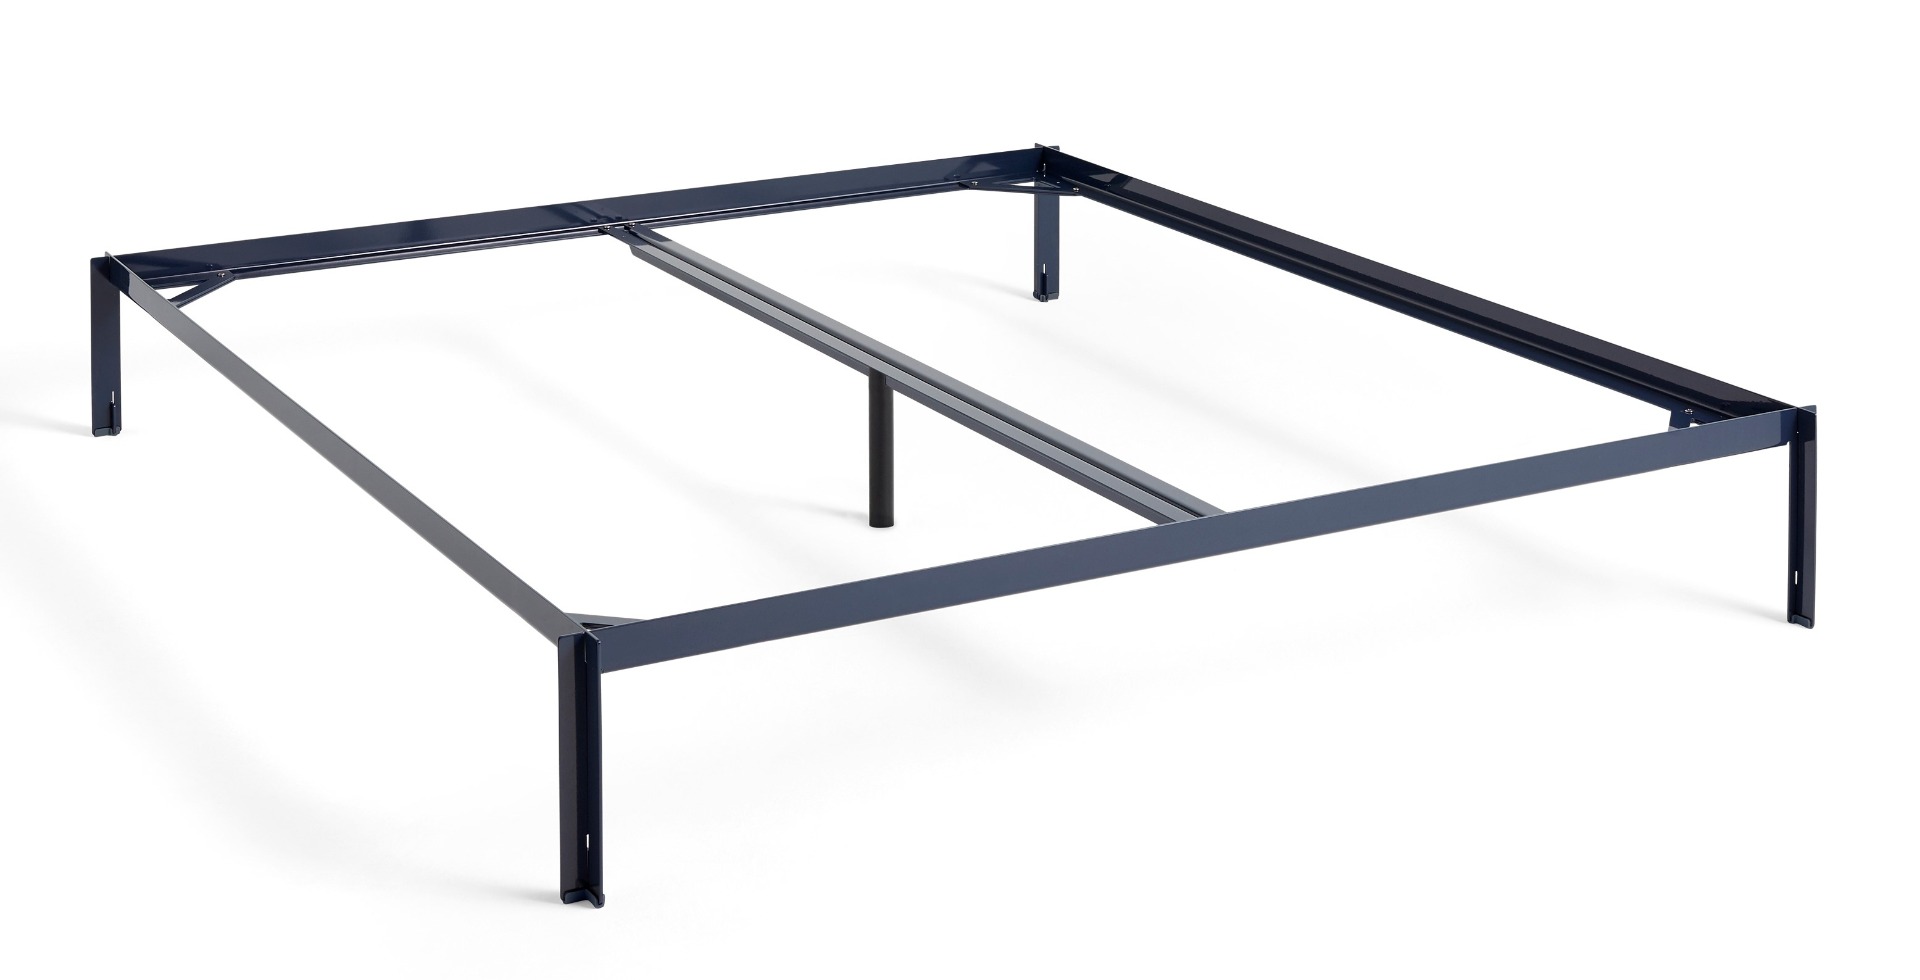 https://www.fundesign.nl/media/catalog/product/a/b/ab073-b561-ah37_connect_bed_w180xl200xh30_with_support_bar_deep_blue.jpg